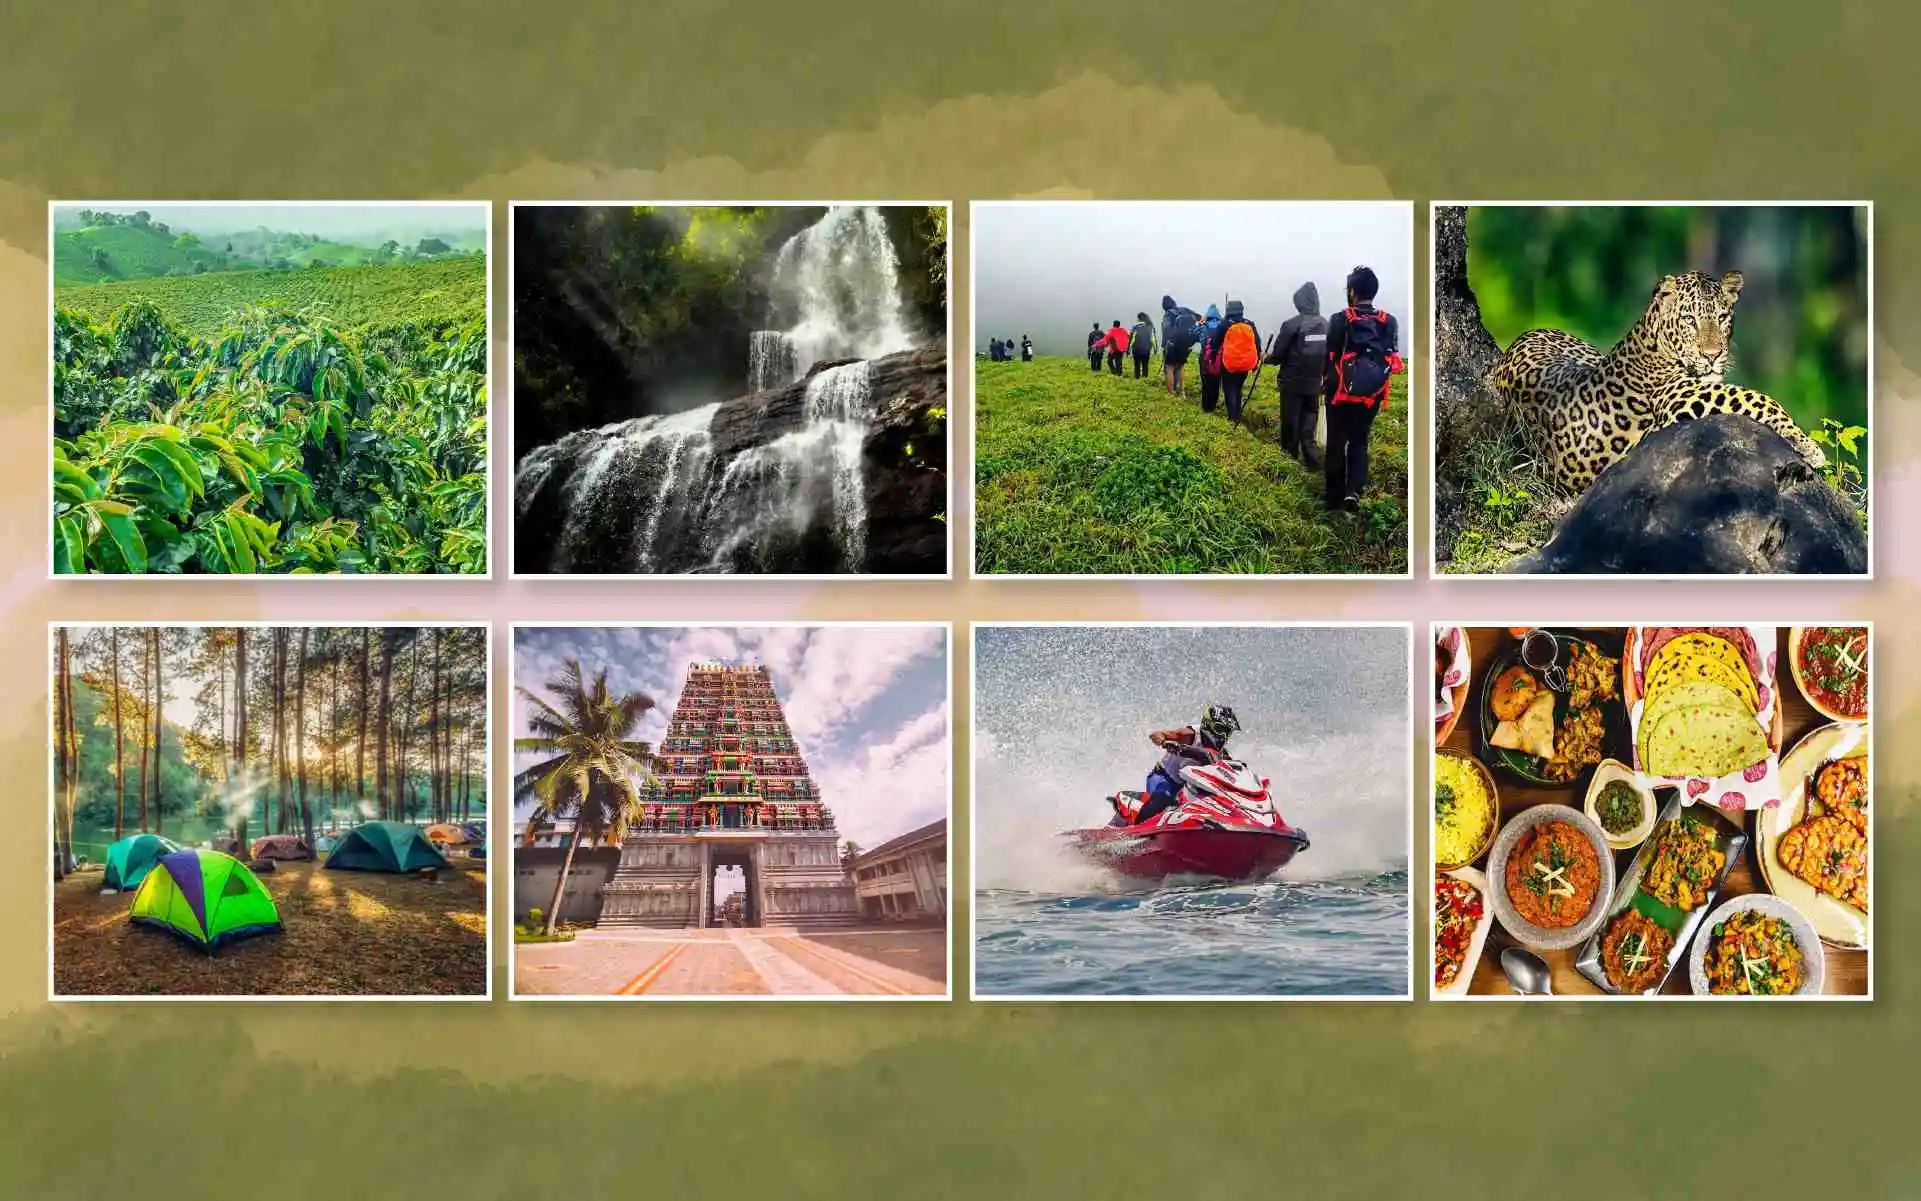 Image of all the best tourist attractions & activities to do in Chikmagalur